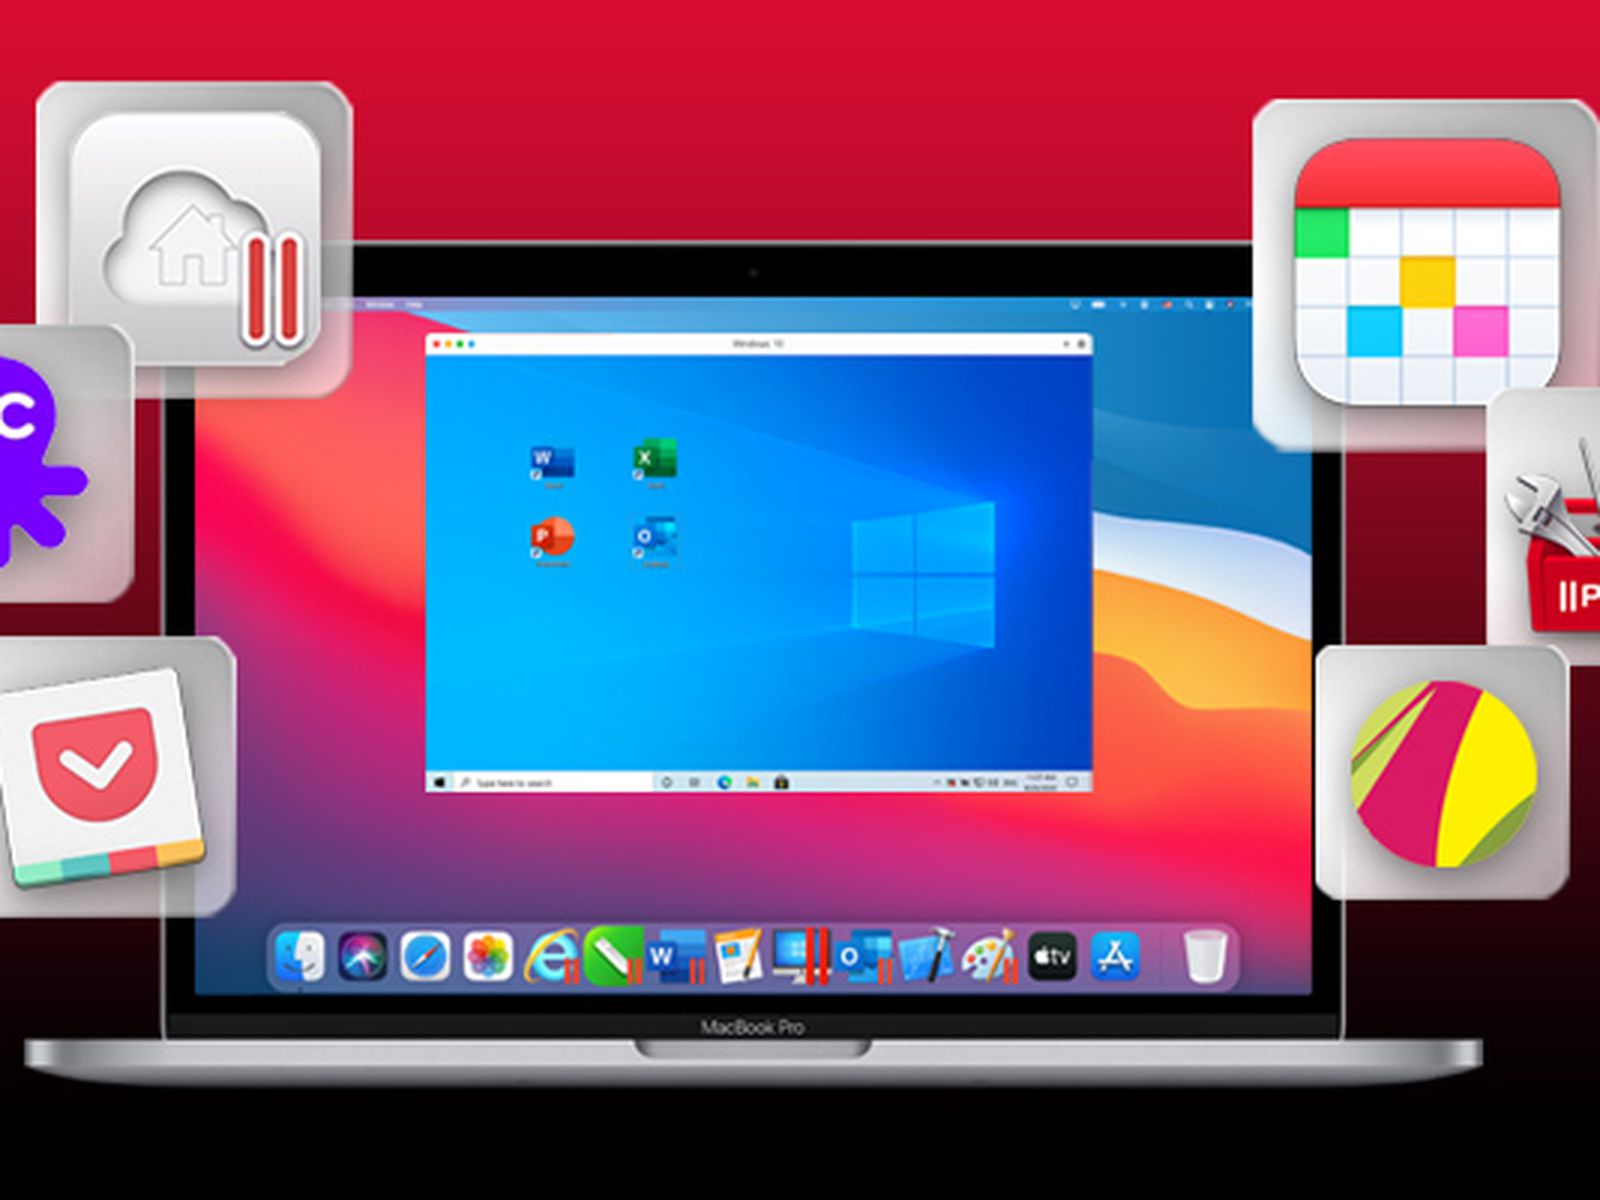 will tweet attacks pro 4 run on parallels for mac without buying a windows 10 license